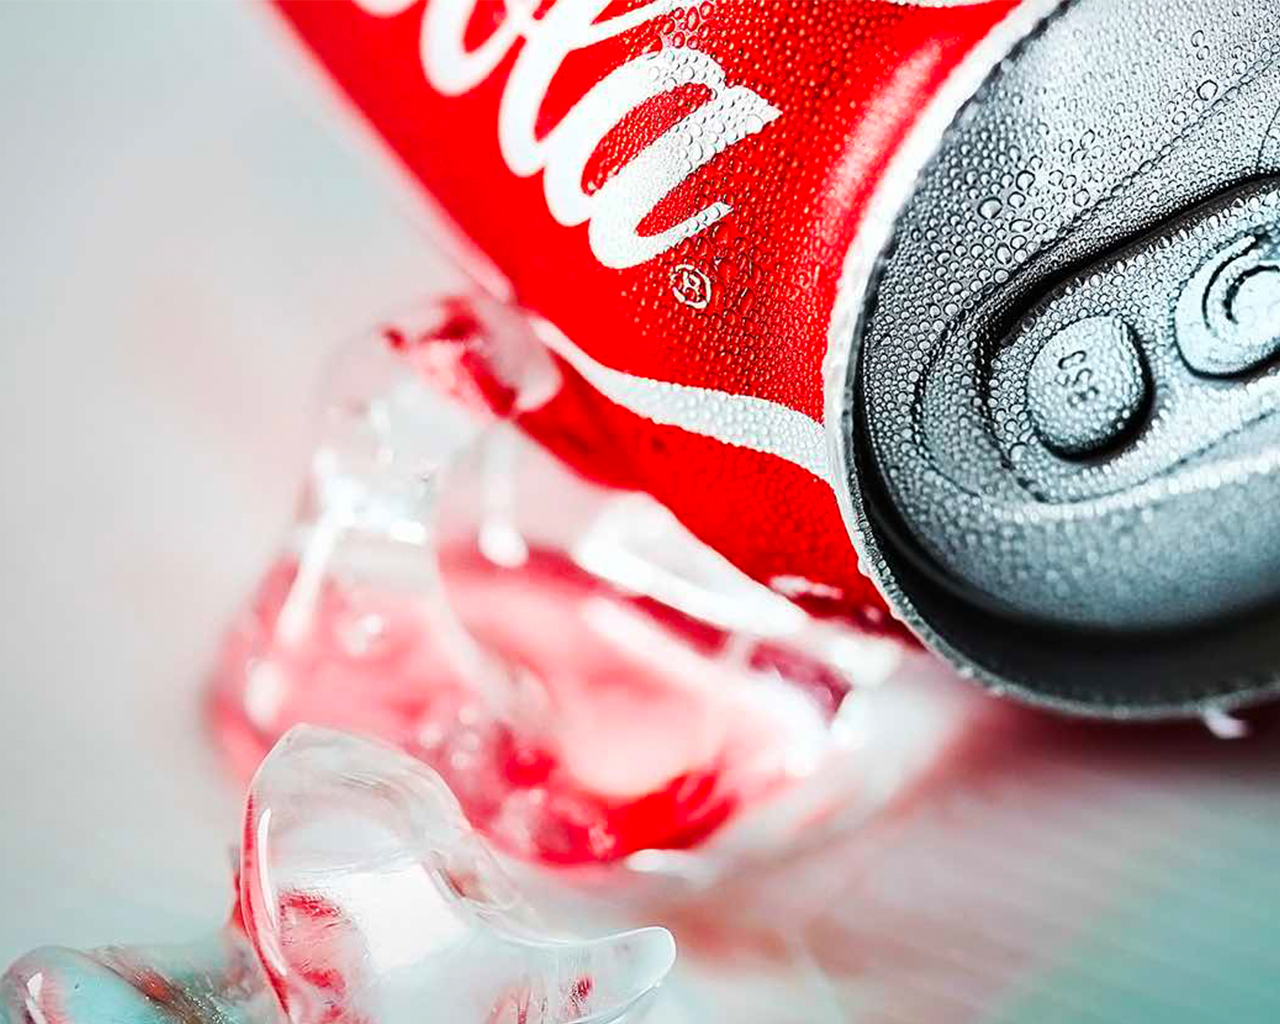 A Coca-Cola can laying next to cubes of ice on a white surface